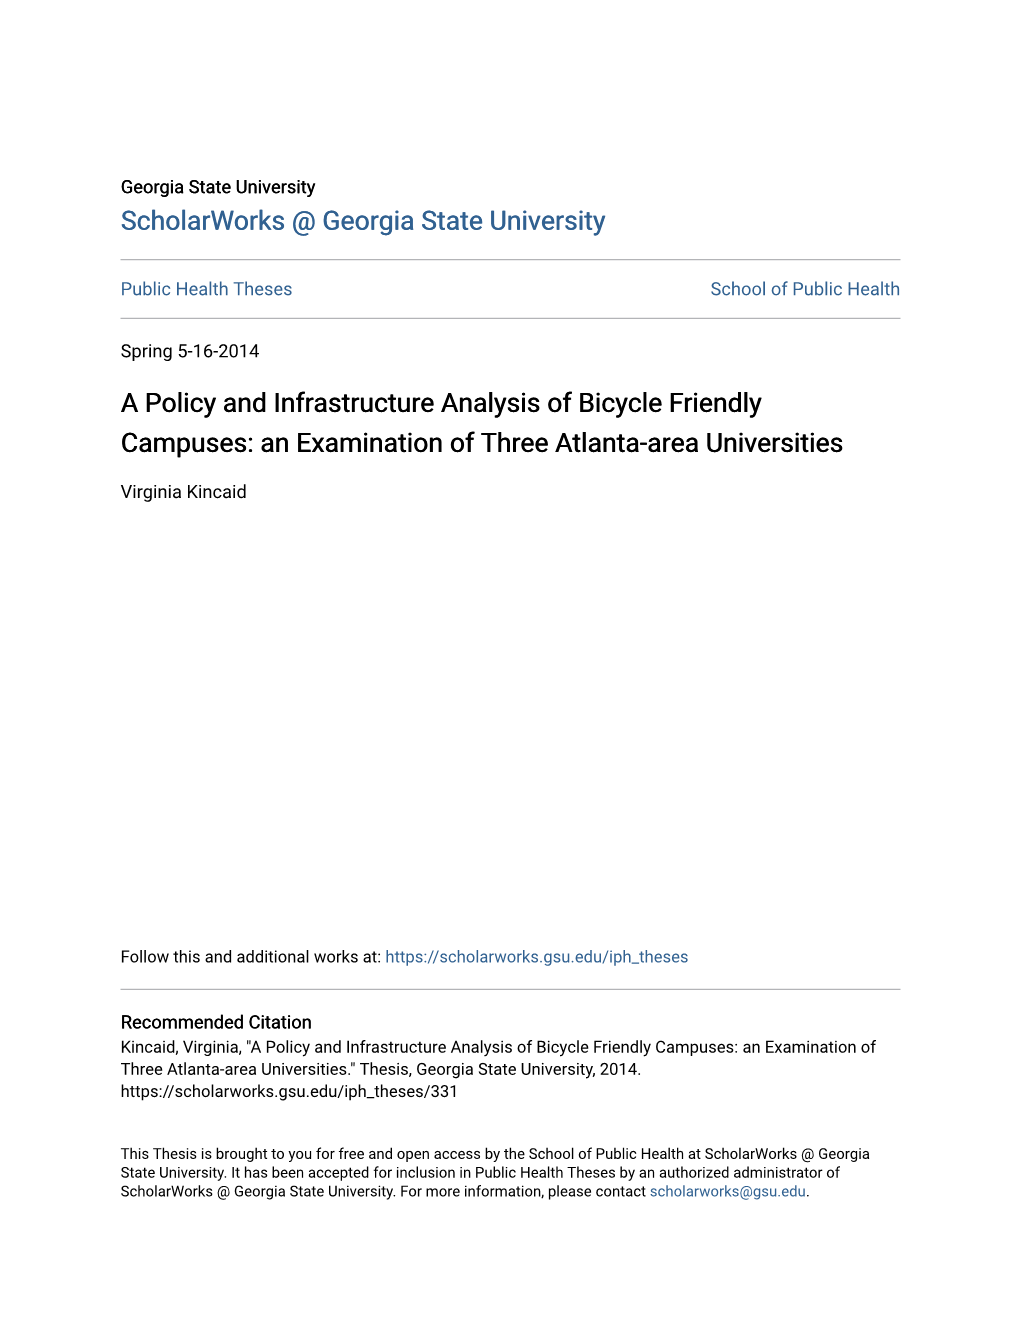 A Policy and Infrastructure Analysis of Bicycle Friendly Campuses: an Examination of Three Atlanta-Area Universities